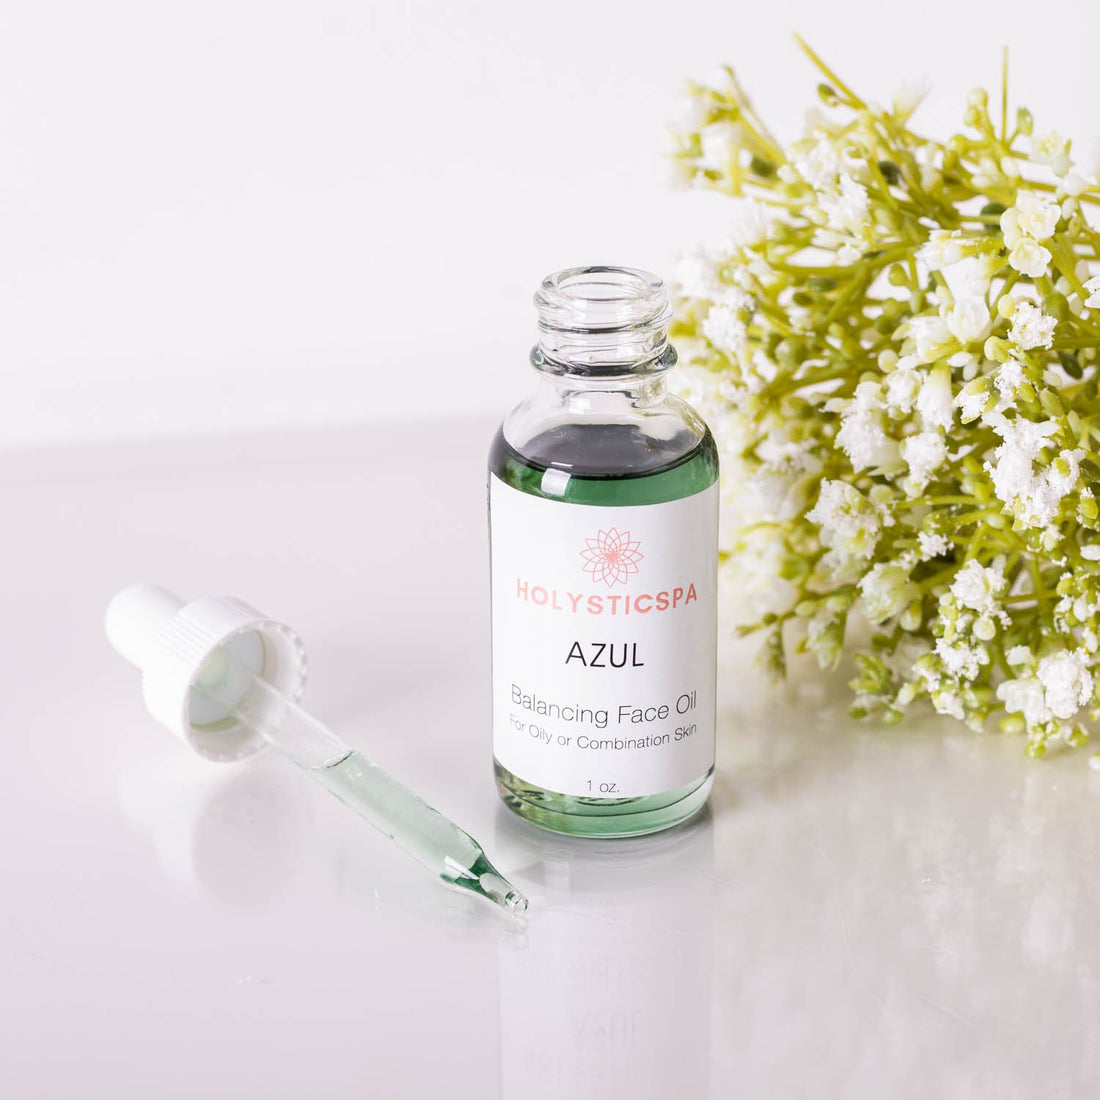 How our Azul  Face Oil help with acne and including hormonal acne